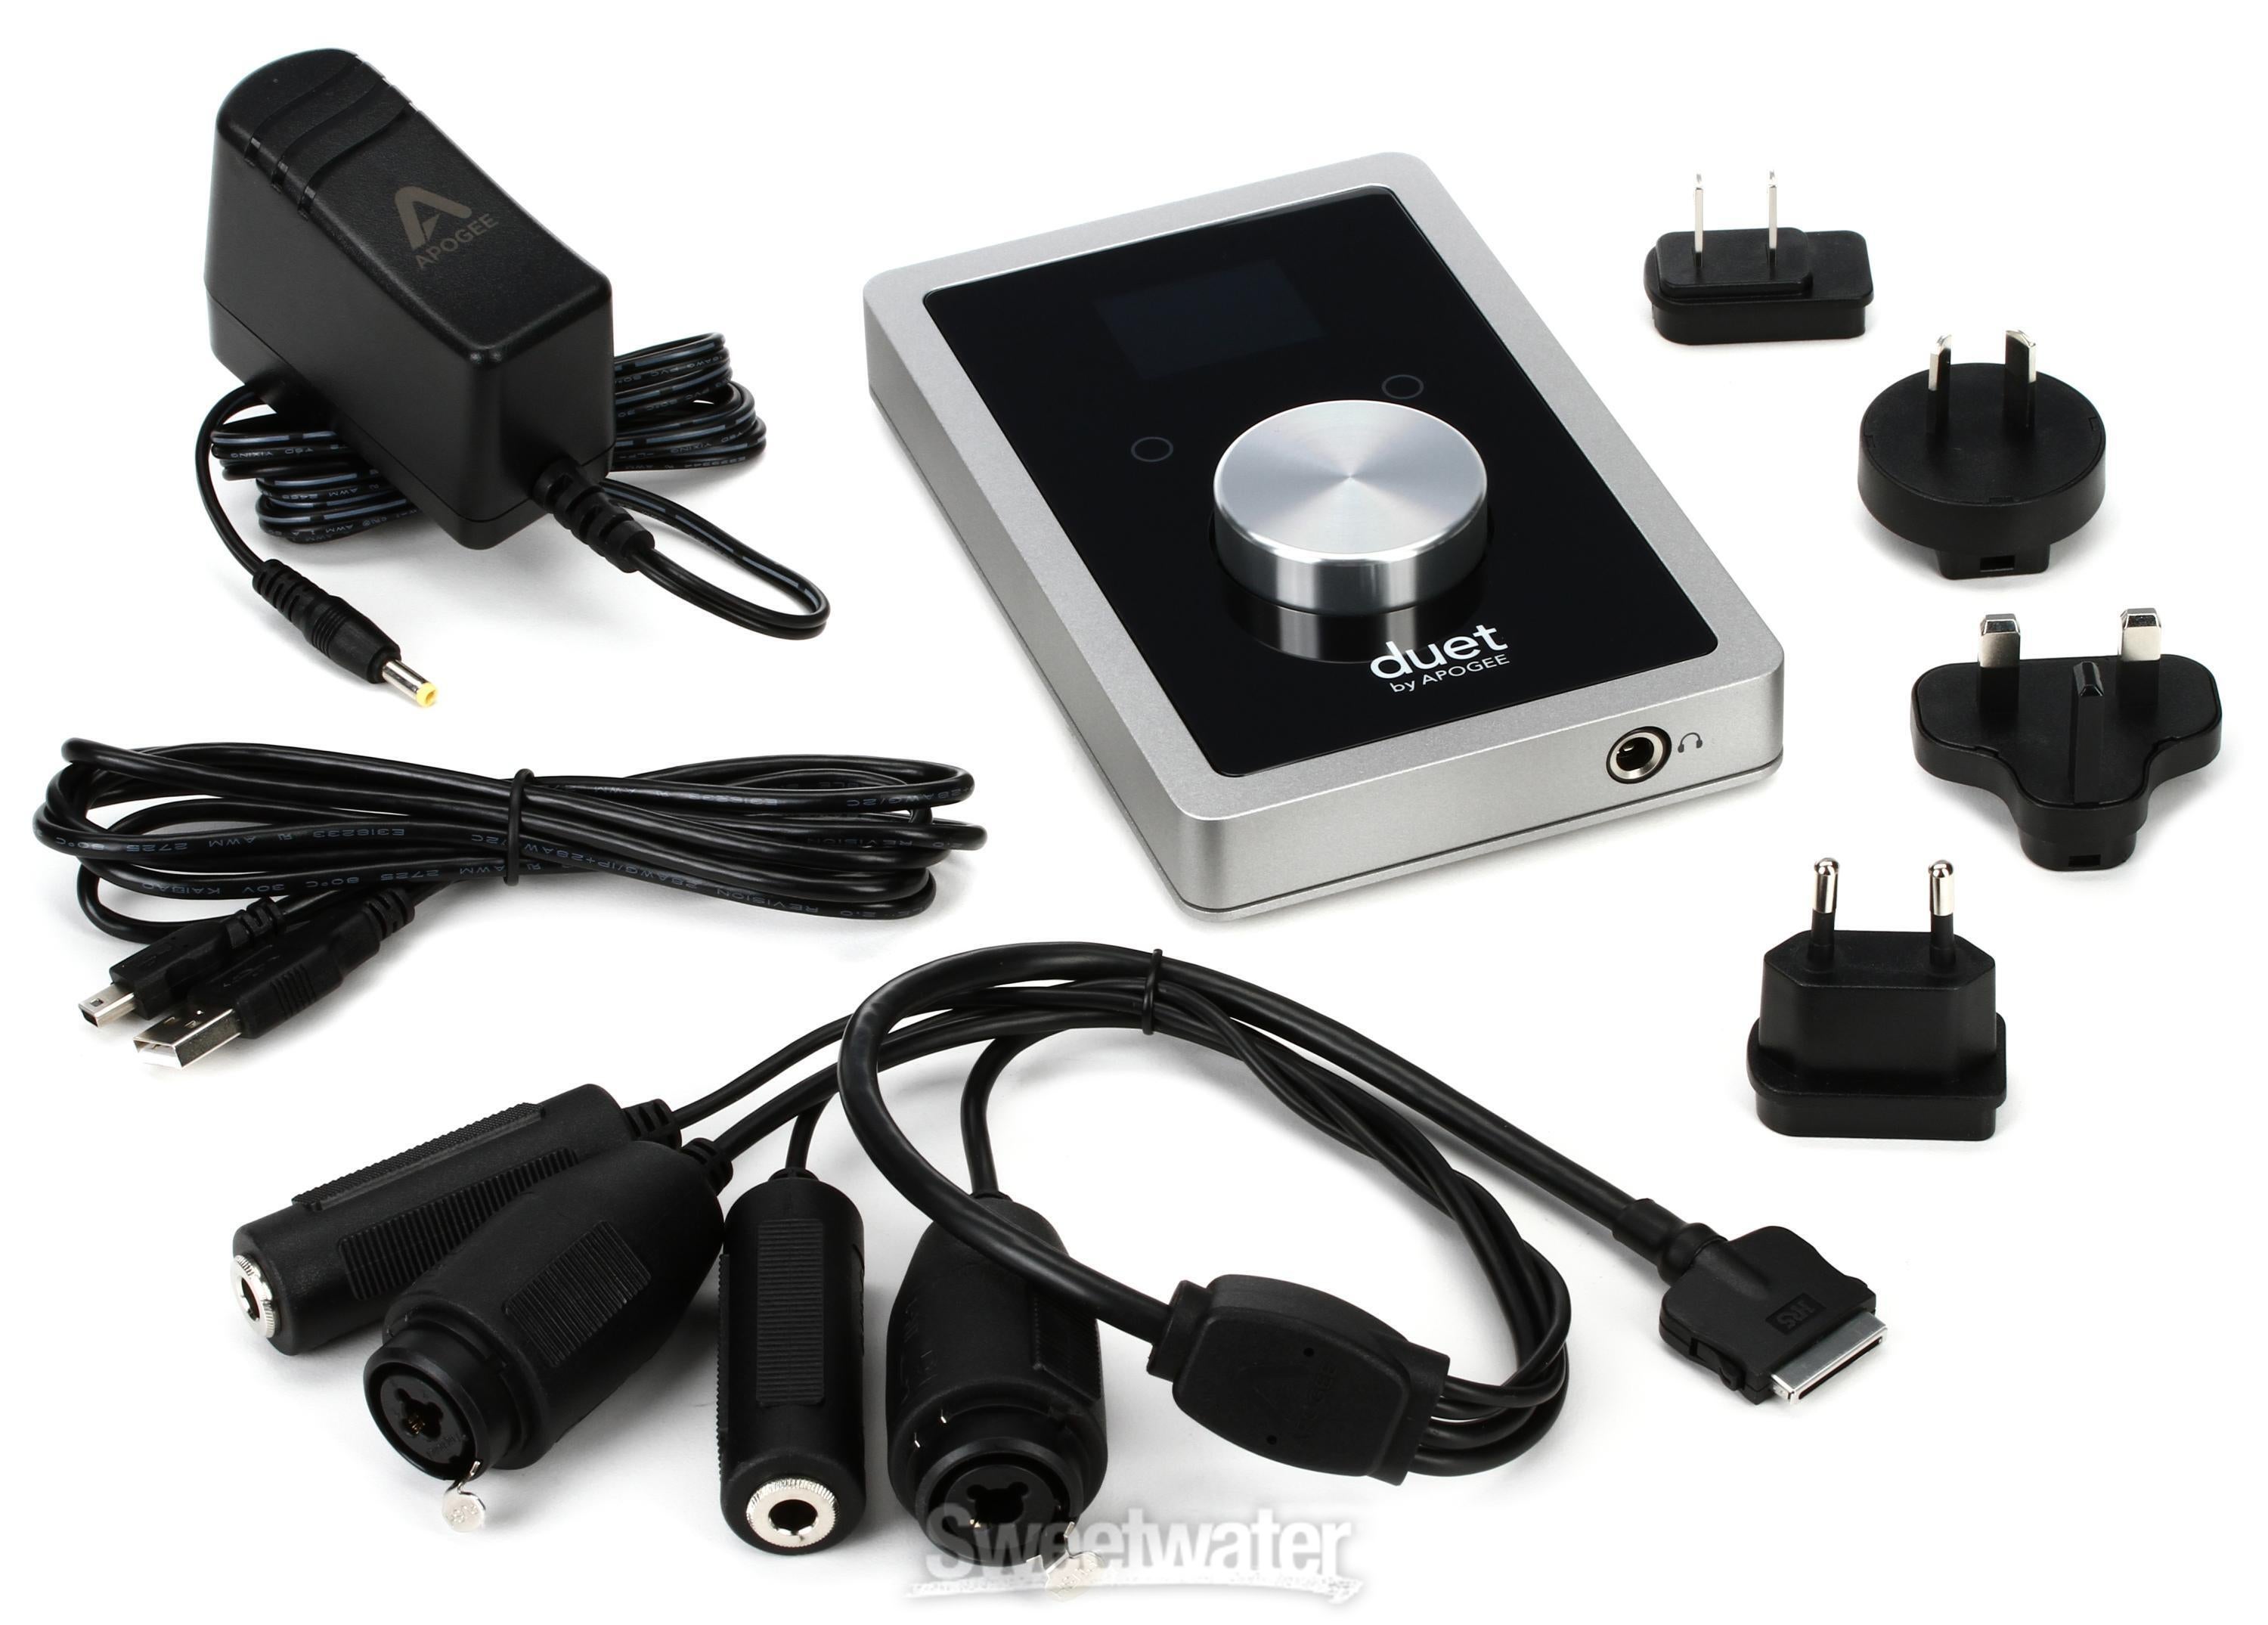 Apogee Duet USB Audio Interface | Sweetwater